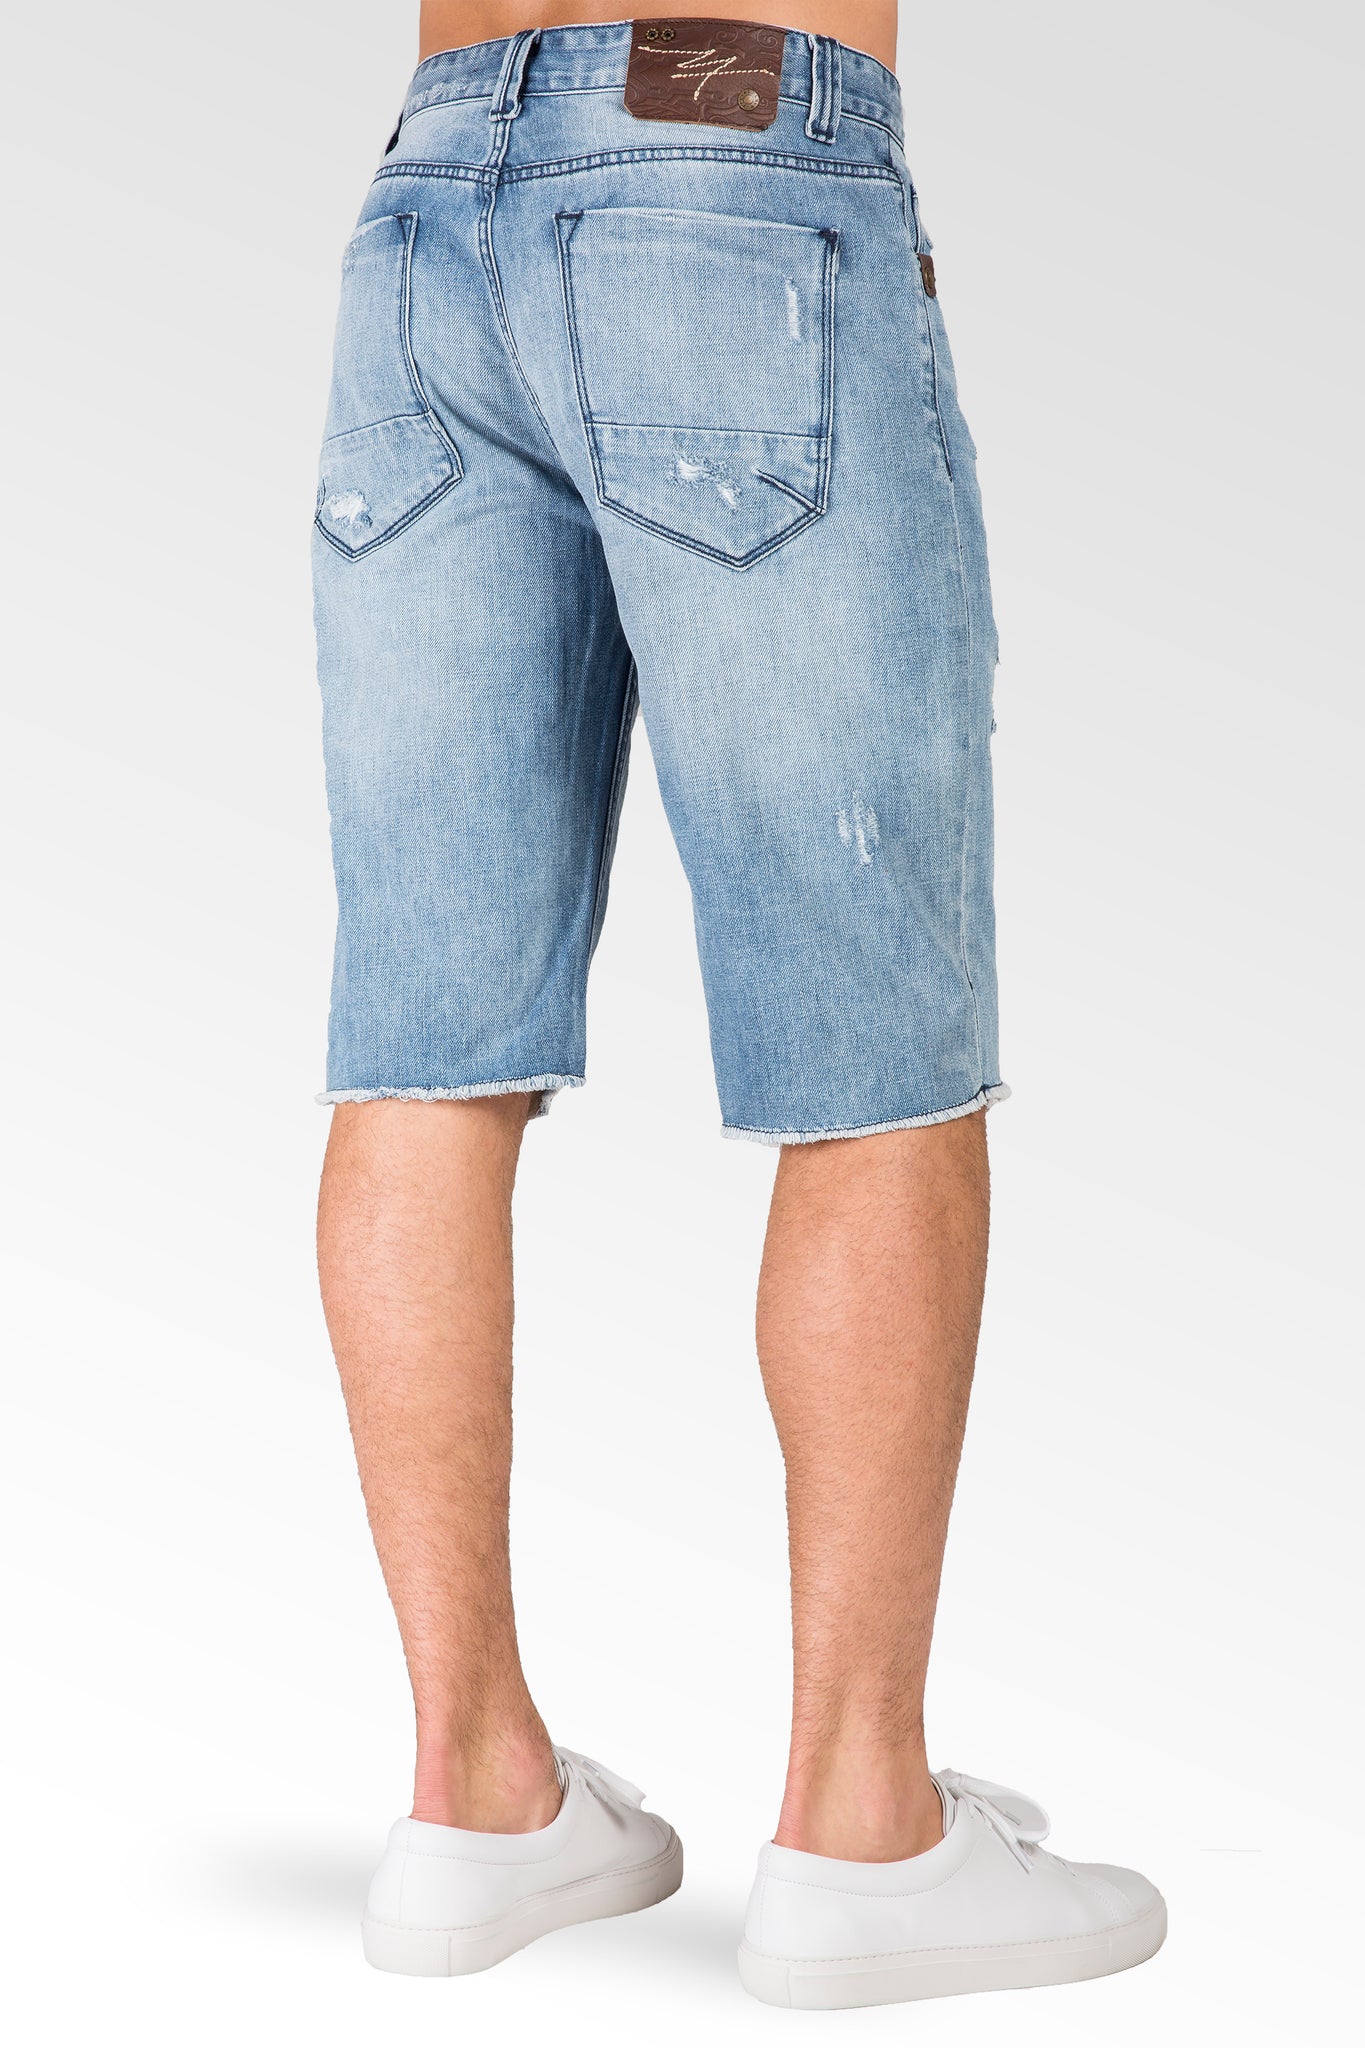 Light Sanded Blue Relaxed Premium Denim Cut Off Shorts Distressed Mended Raw Edge